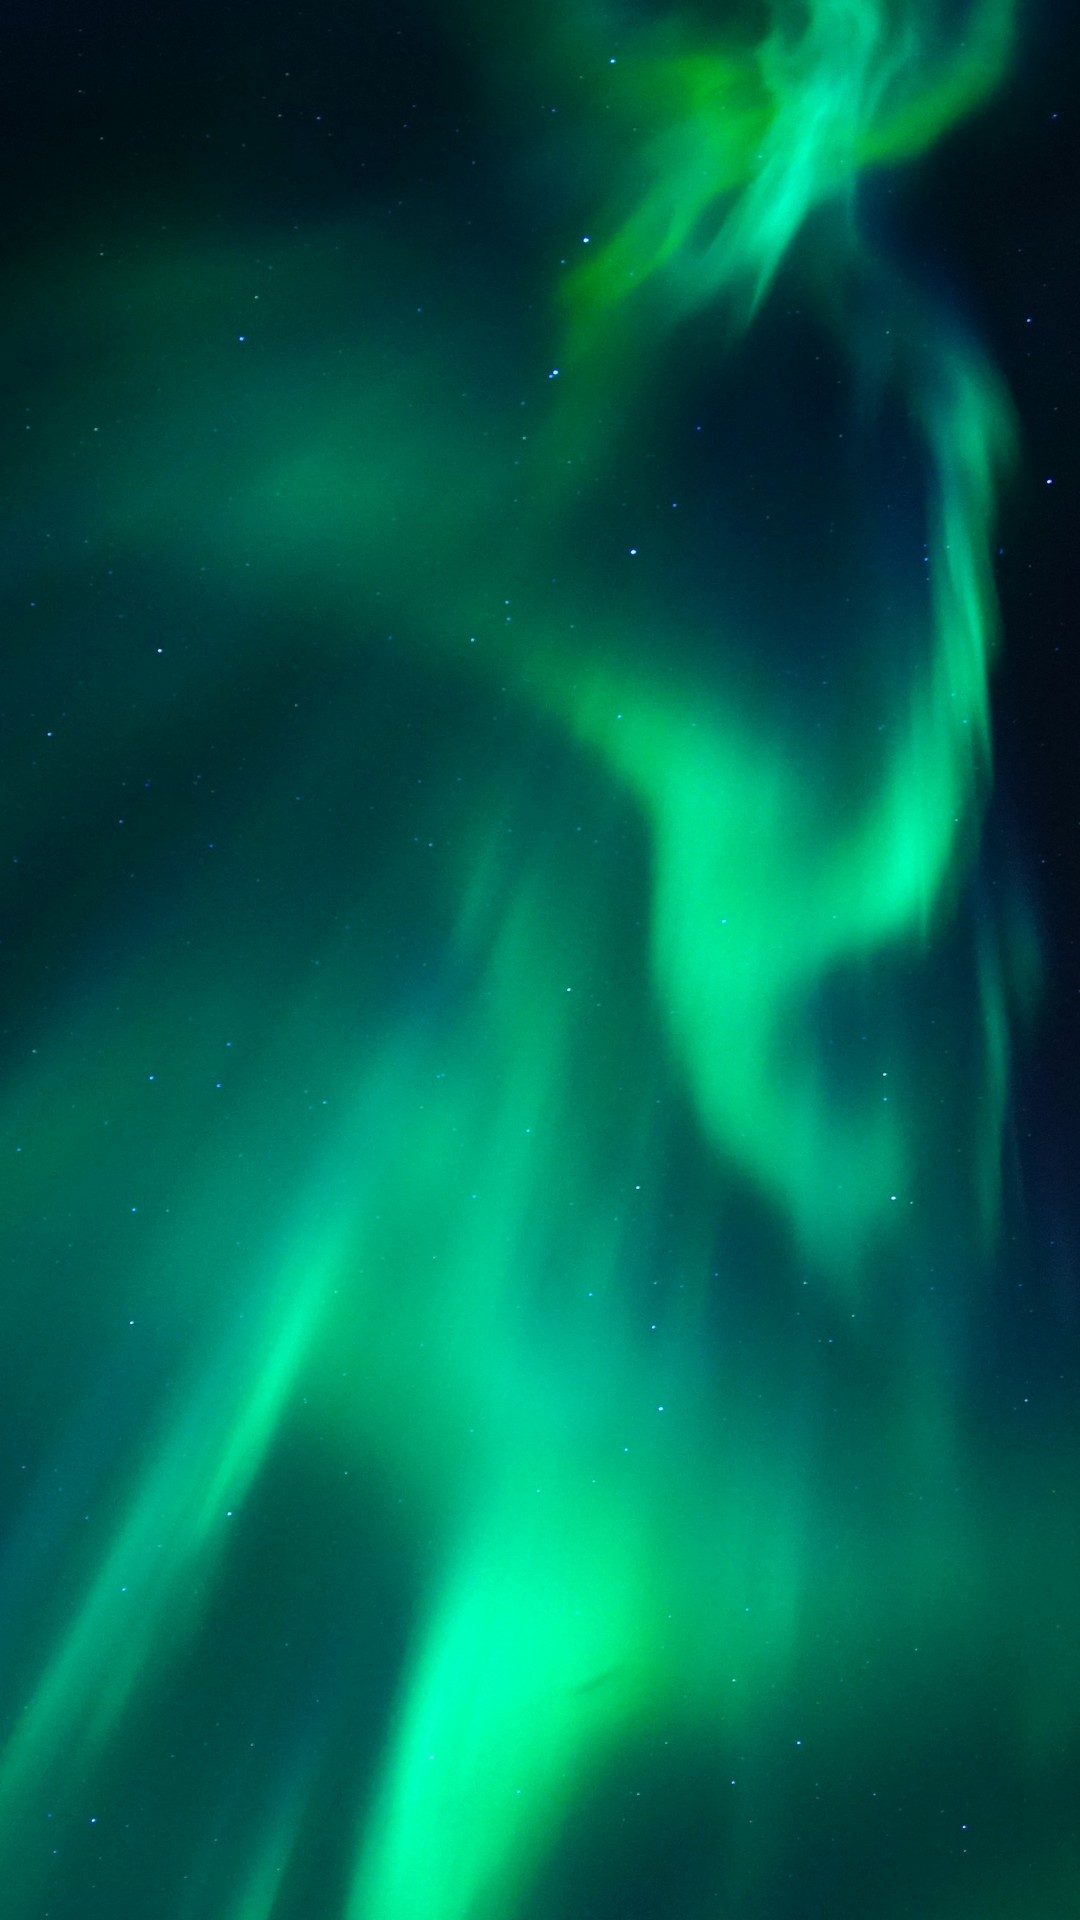 iPhone Wallpaper HD Aurora with high-resolution 1080x1920 pixel. You can use this wallpaper for your iPhone 5, 6, 7, 8, X, XS, XR backgrounds, Mobile Screensaver, or iPad Lock Screen